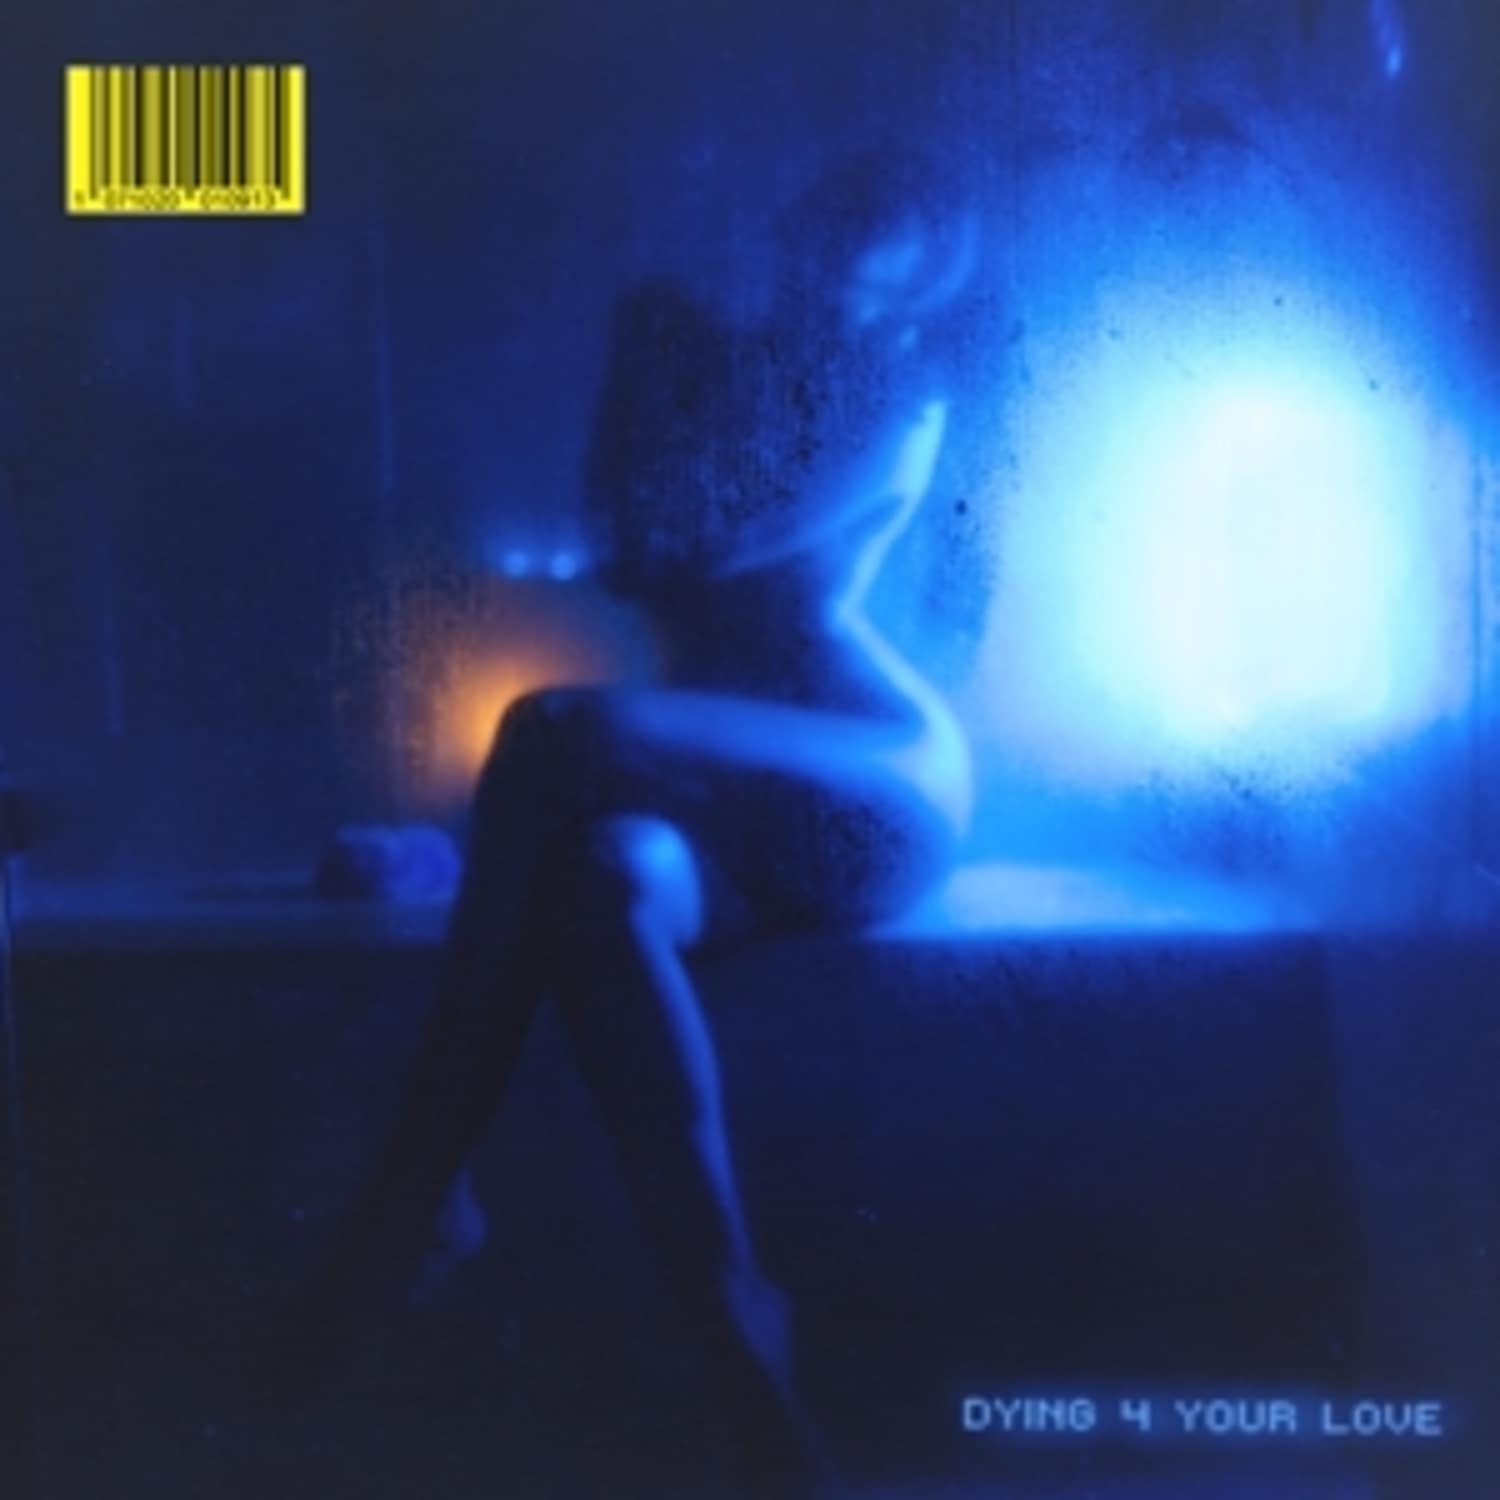 Snoh Aalegra - 7DYING 4 YOUR LOVE 